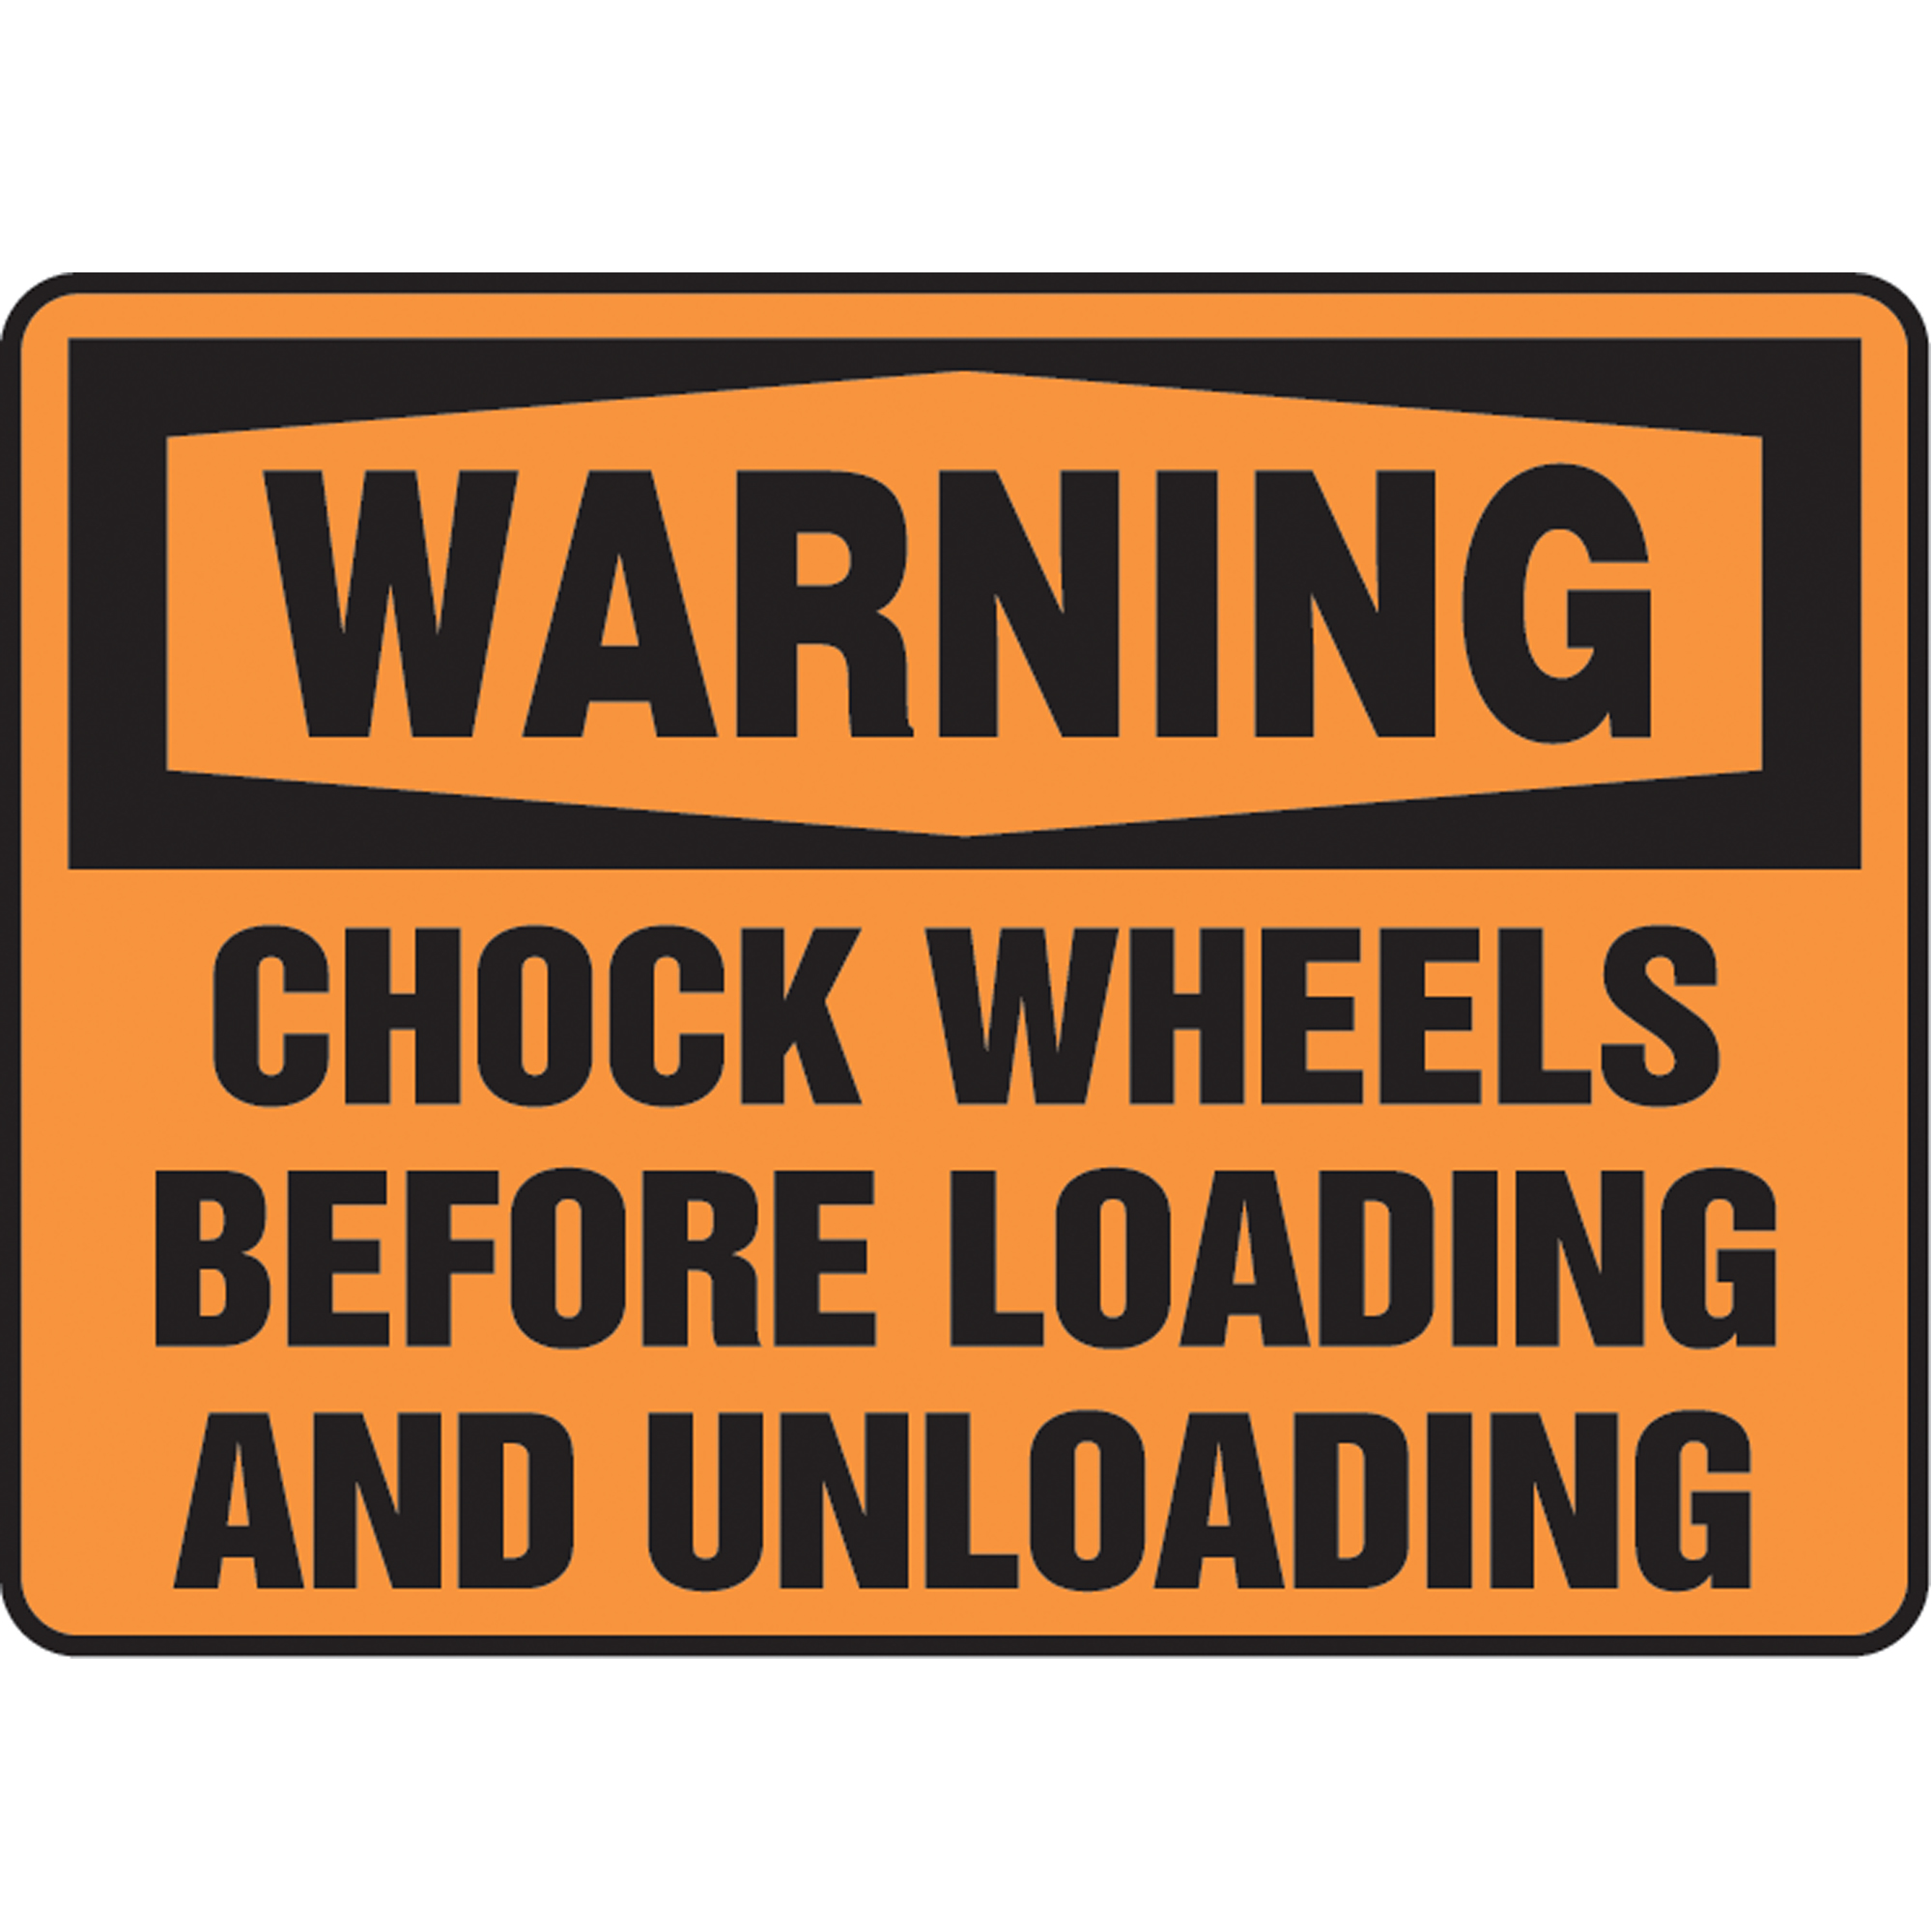 MTKC302XP 7 x 10 Inches AccuformWarning Chock Wheels Before Loading and Unloading Safety Sign Accu-Shield 